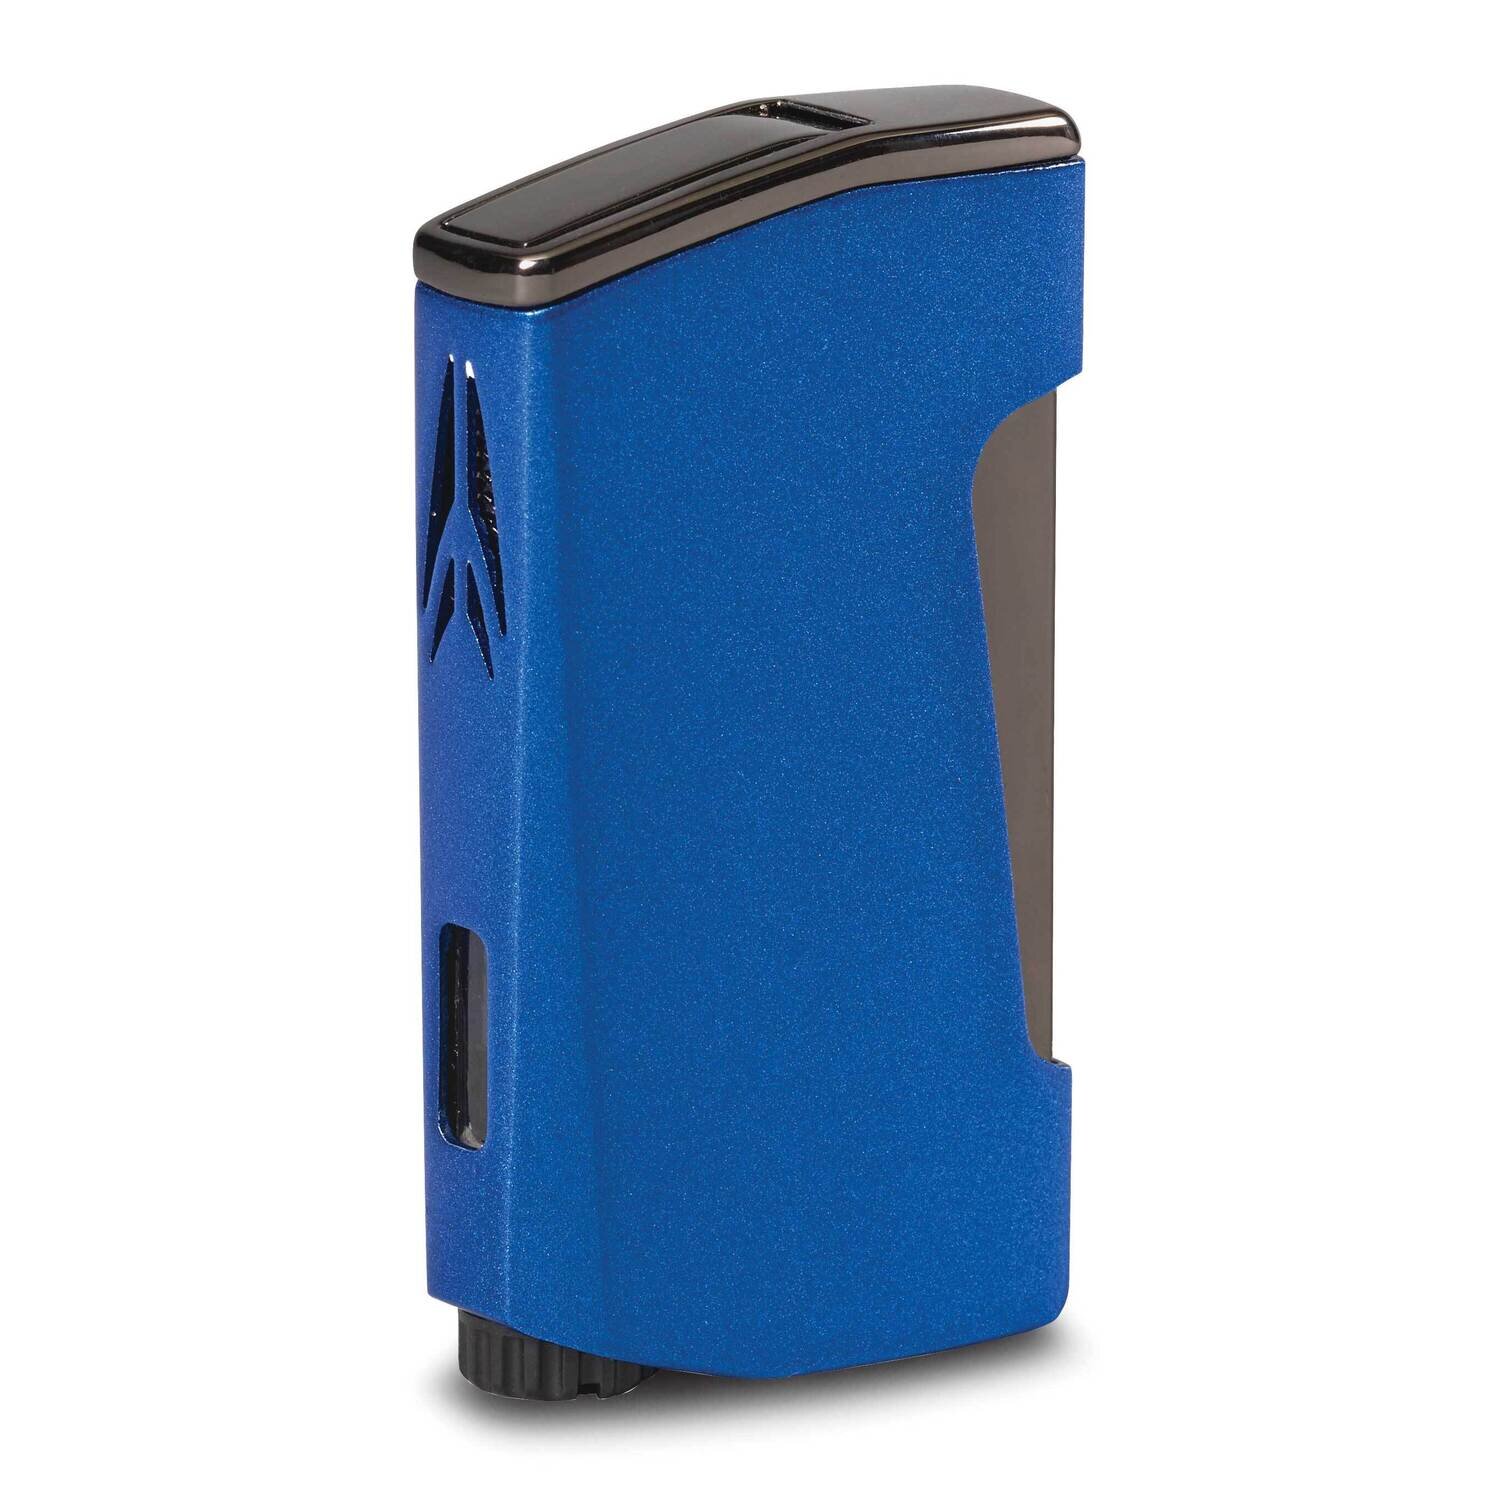 Lotus Chroma Blue Fold-out Punch Double Flame Lighter GM25108BL